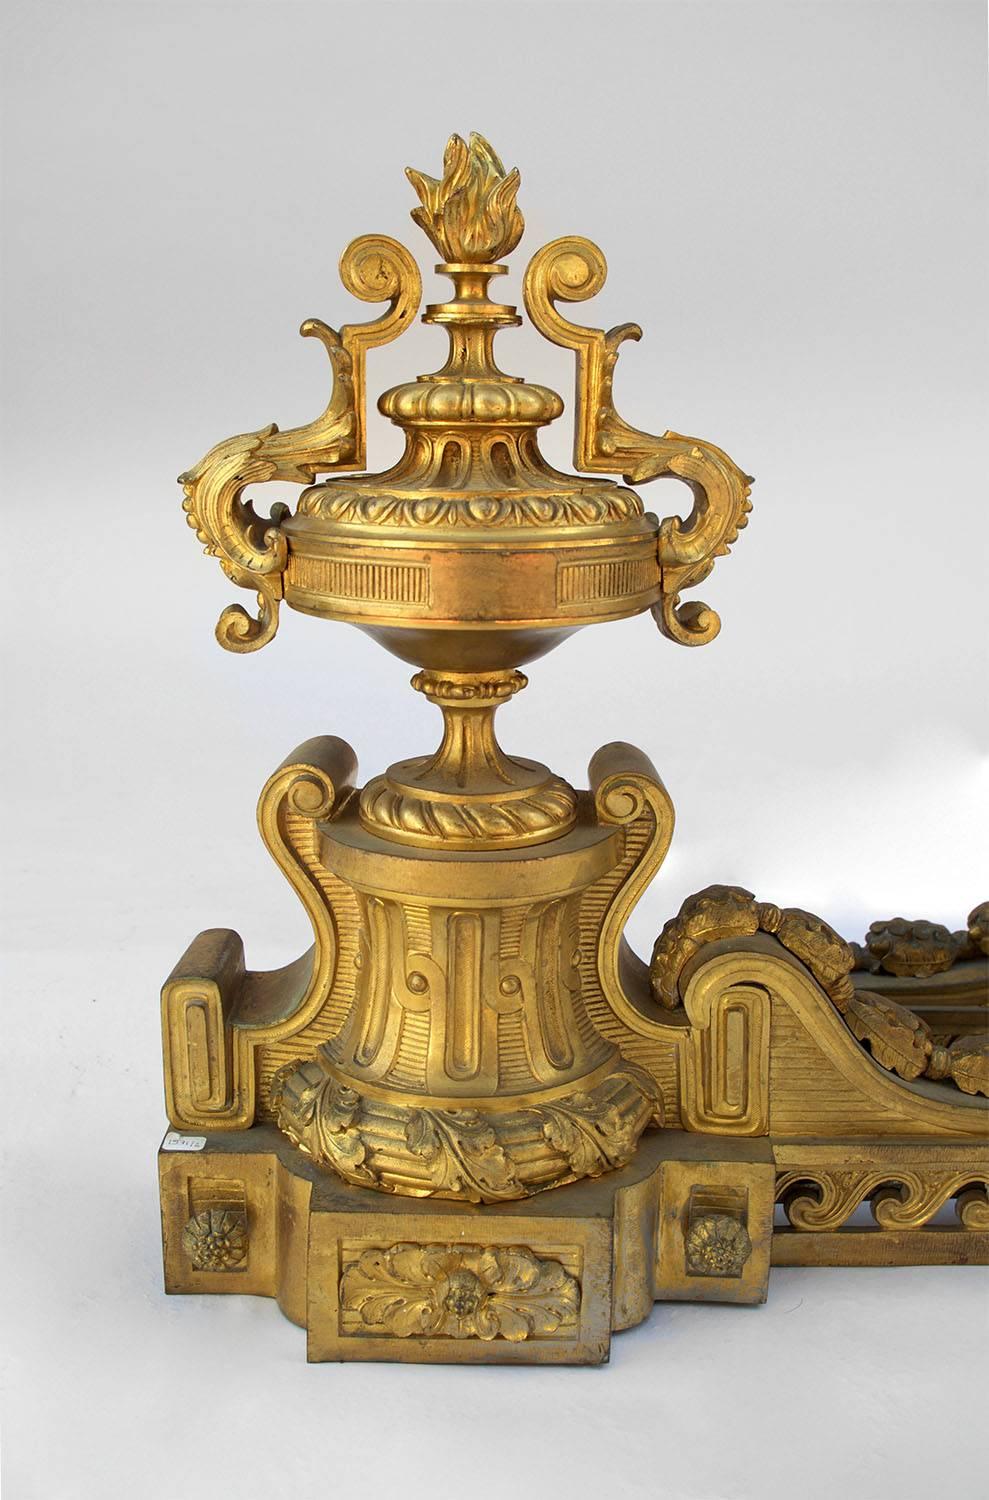 Large pair of chiseled and gilt bronze fire dogs, Louis XVI style.
The upright, adorned with stylized waves frieze, is linked to the front part by a volute with acorns and oak leaves.
The front part is in cassolette-shape topped by a torch and its